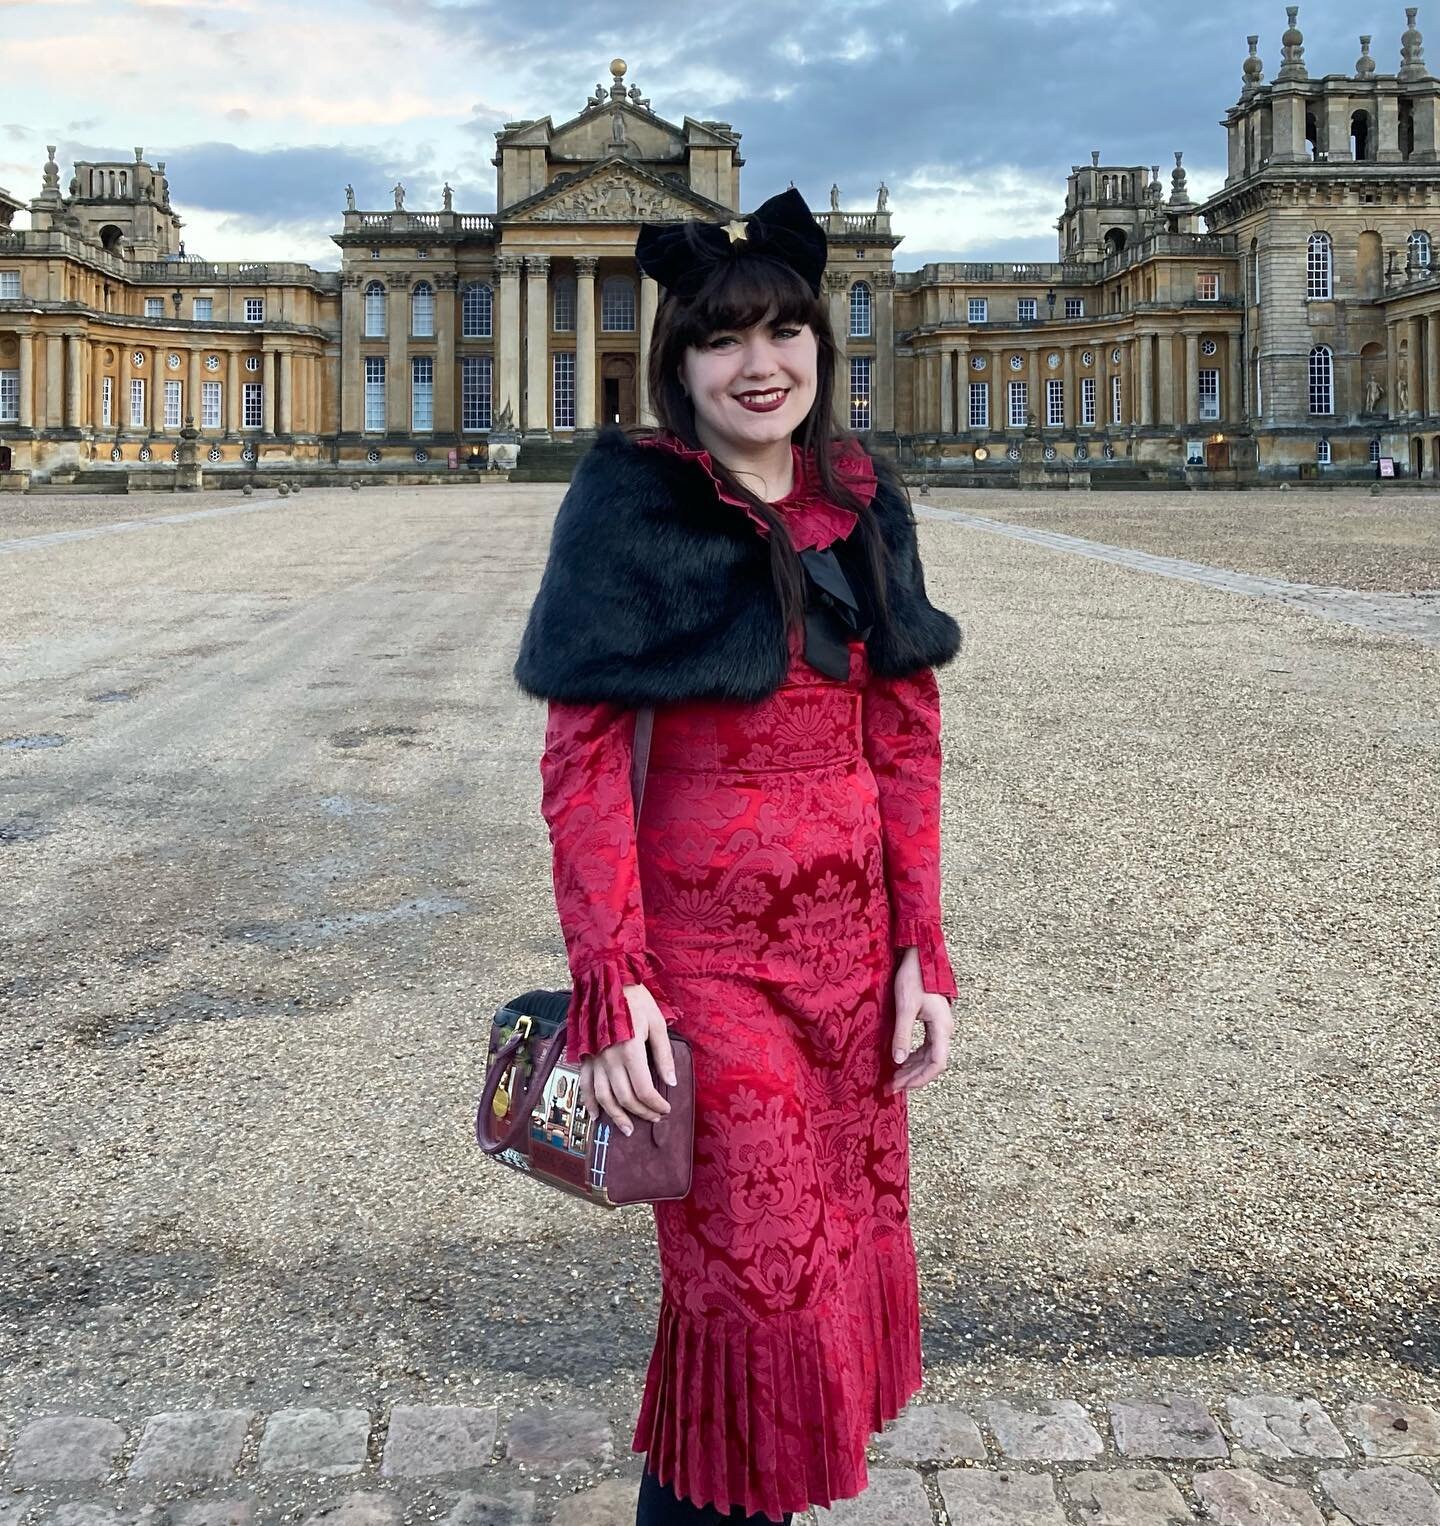 👑 Last weekend at Blenheim Palace! 👑

This year has started with a fantastic commission from @blenheimpalace to style a selection of wigs for an upcoming exhibition, Crowns and Coronets. I&rsquo;ll be sharing more of my wigs this week so stay tuned